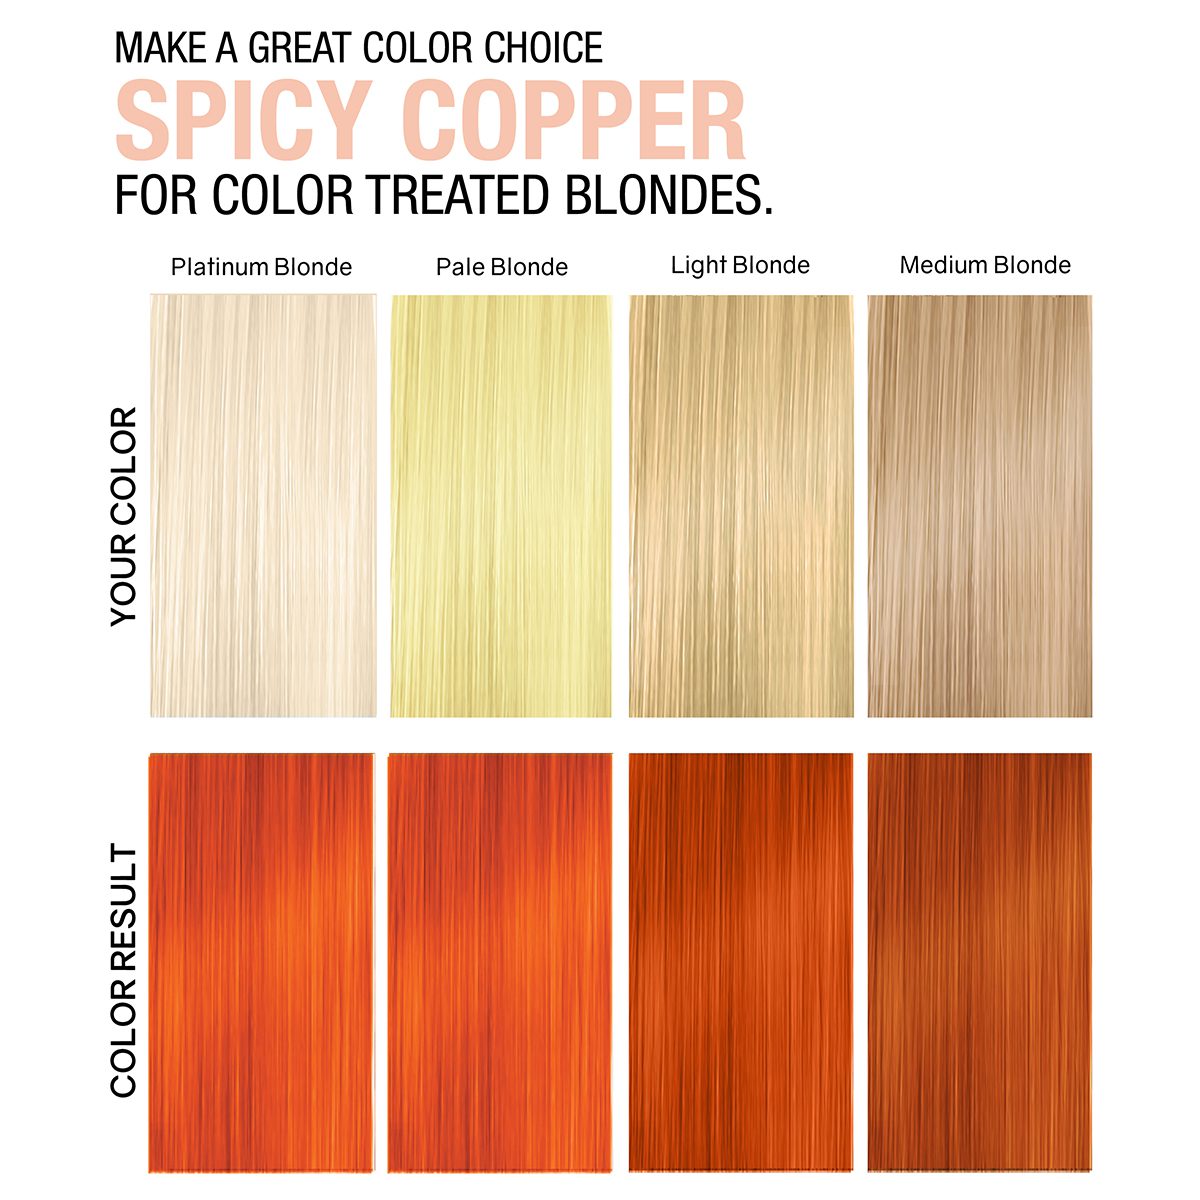 Spicy Copper for color treated blondes.